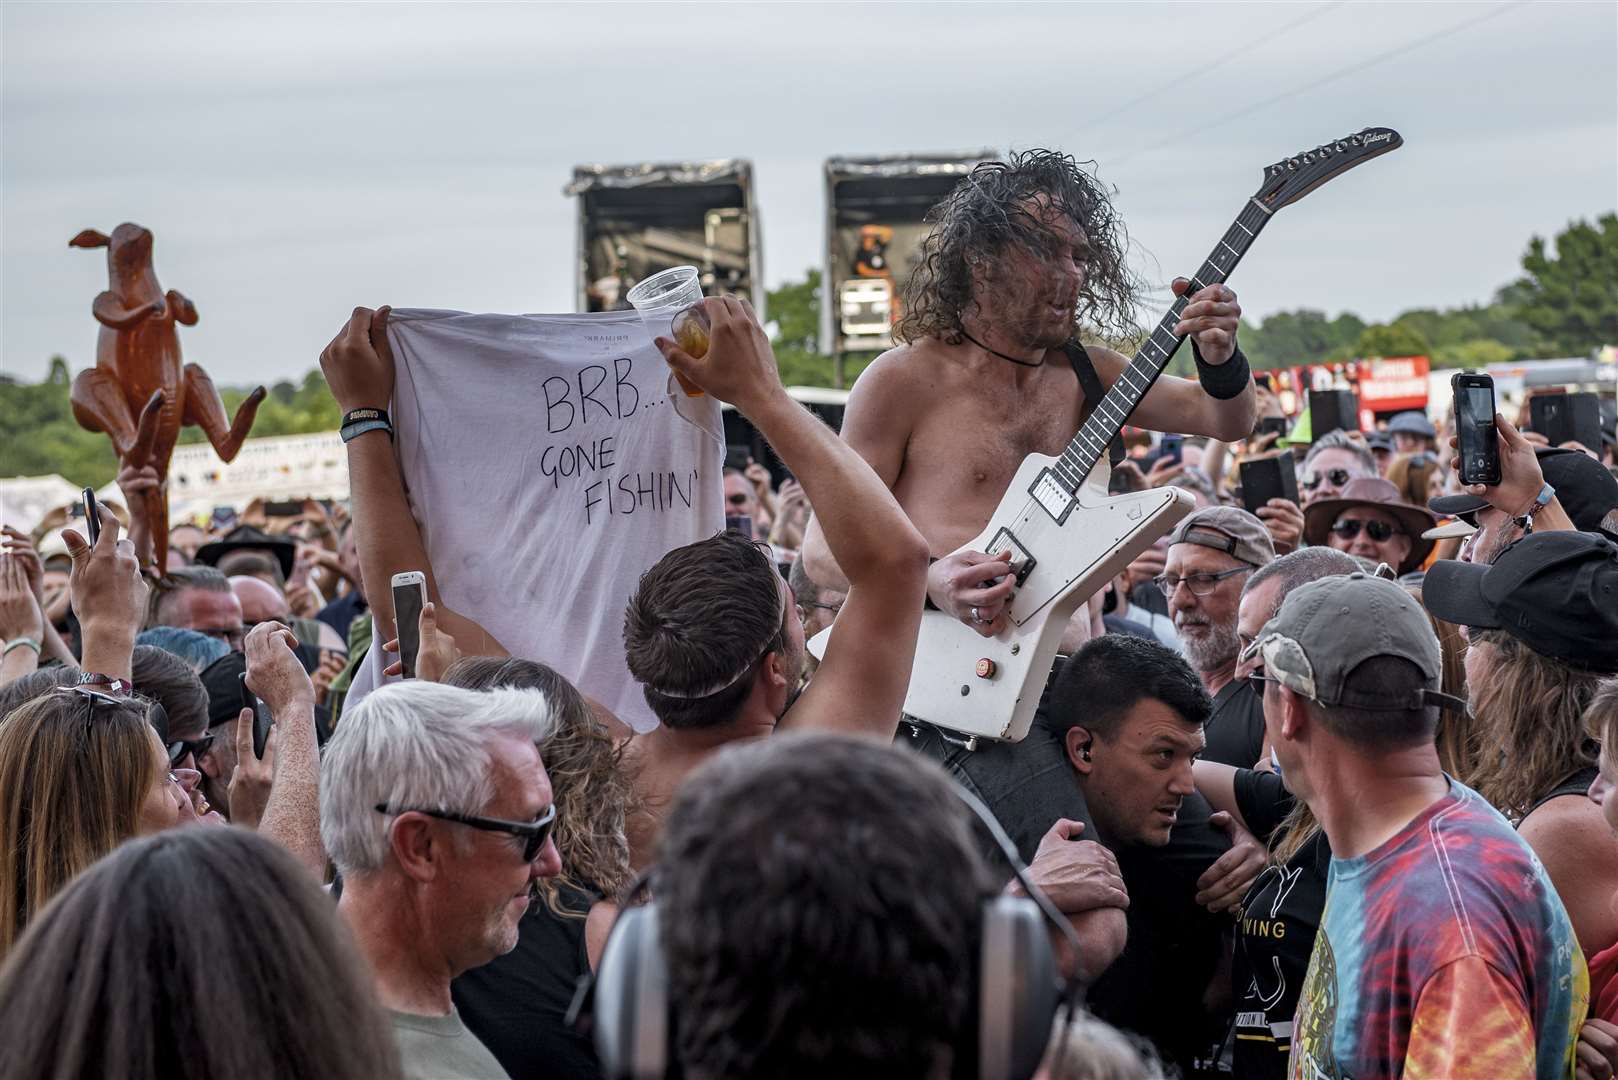 Australian rock band Airbourne were one of the bands to perform at the last Ramblin' Man Fair in 2019. Picture: Chris White